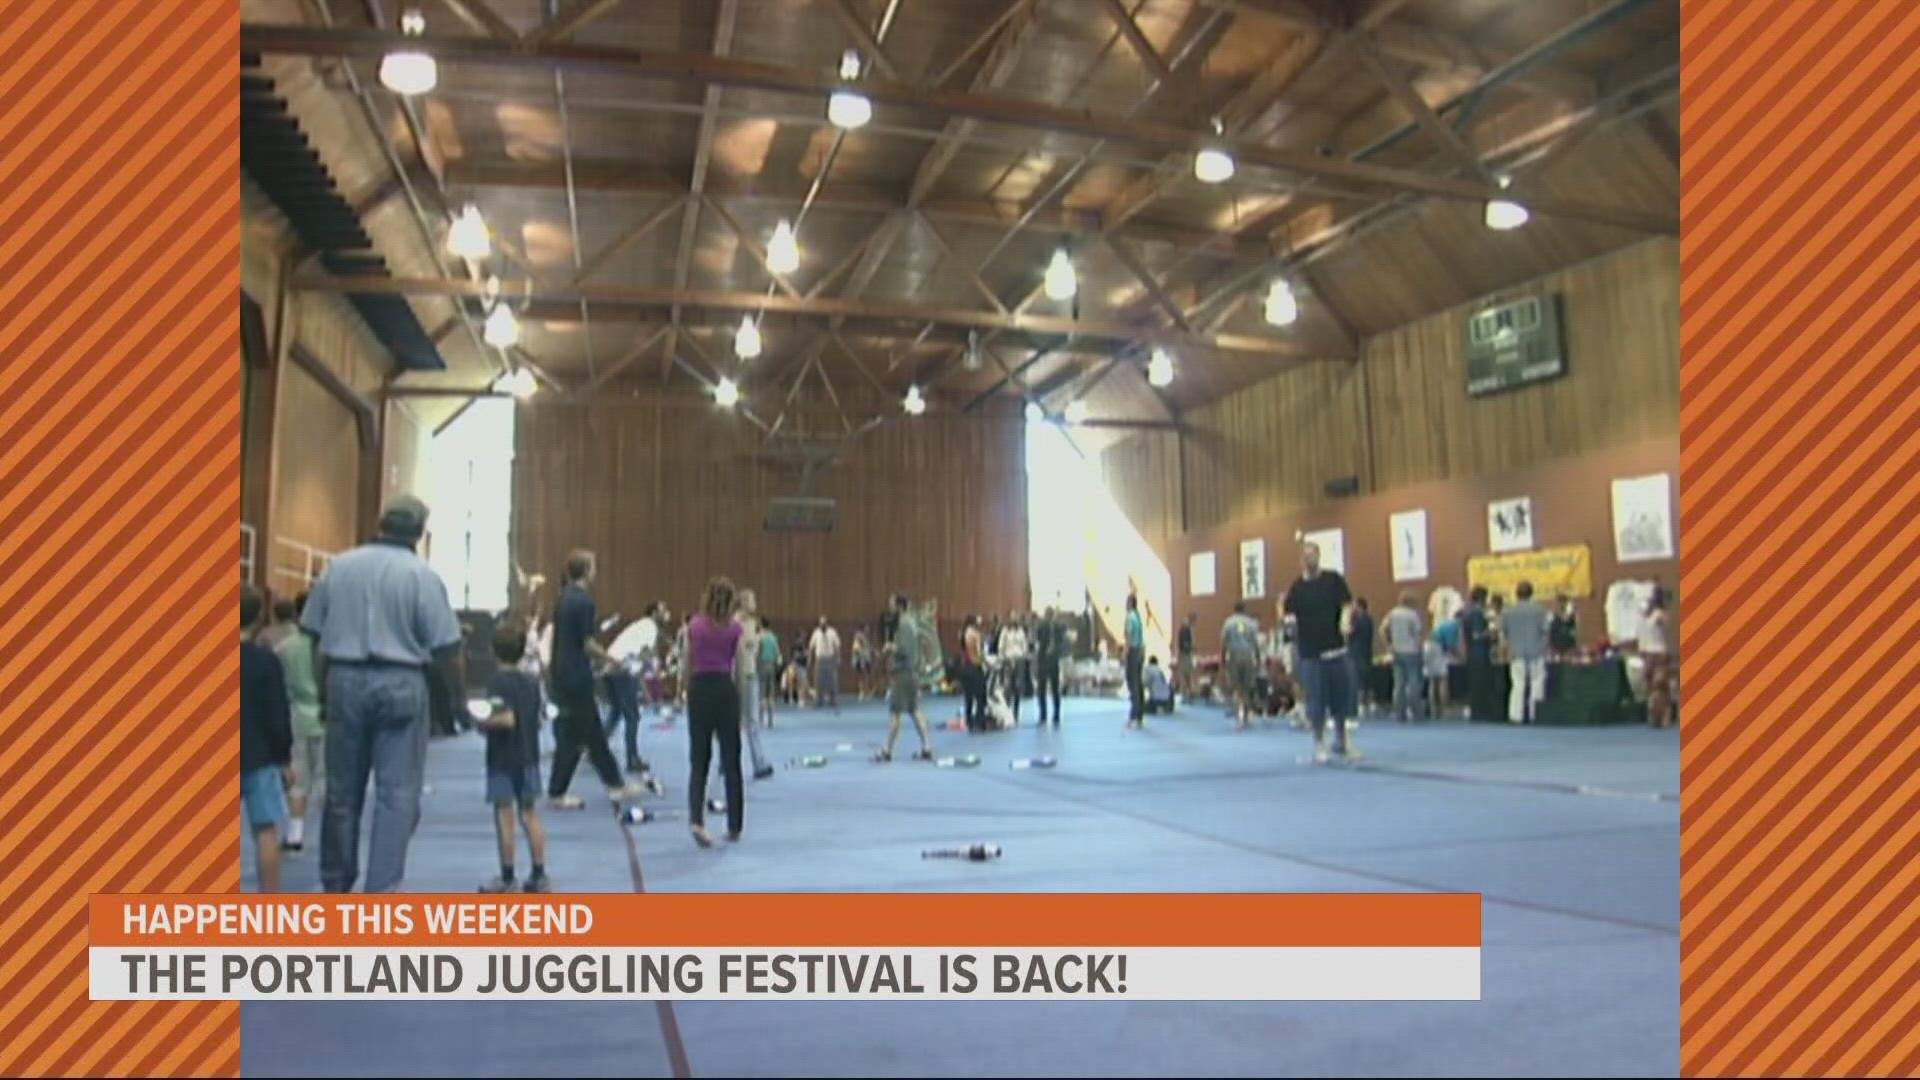 Entertainment acts from all over the country will converge in Portland for the festival this weekend.